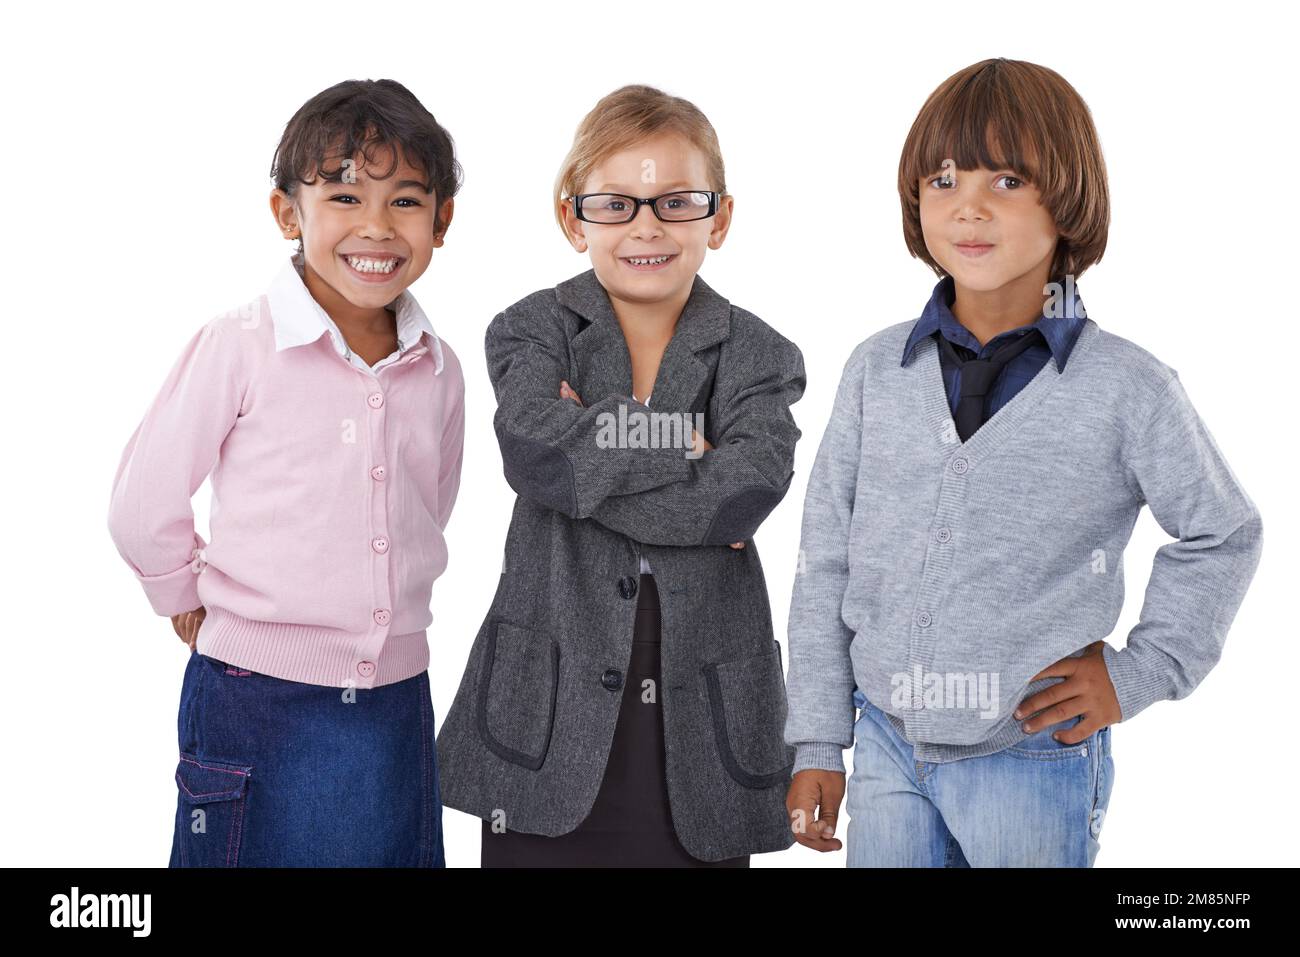 Confident kids. Three young children pretending to be grown-ups. Stock Photo